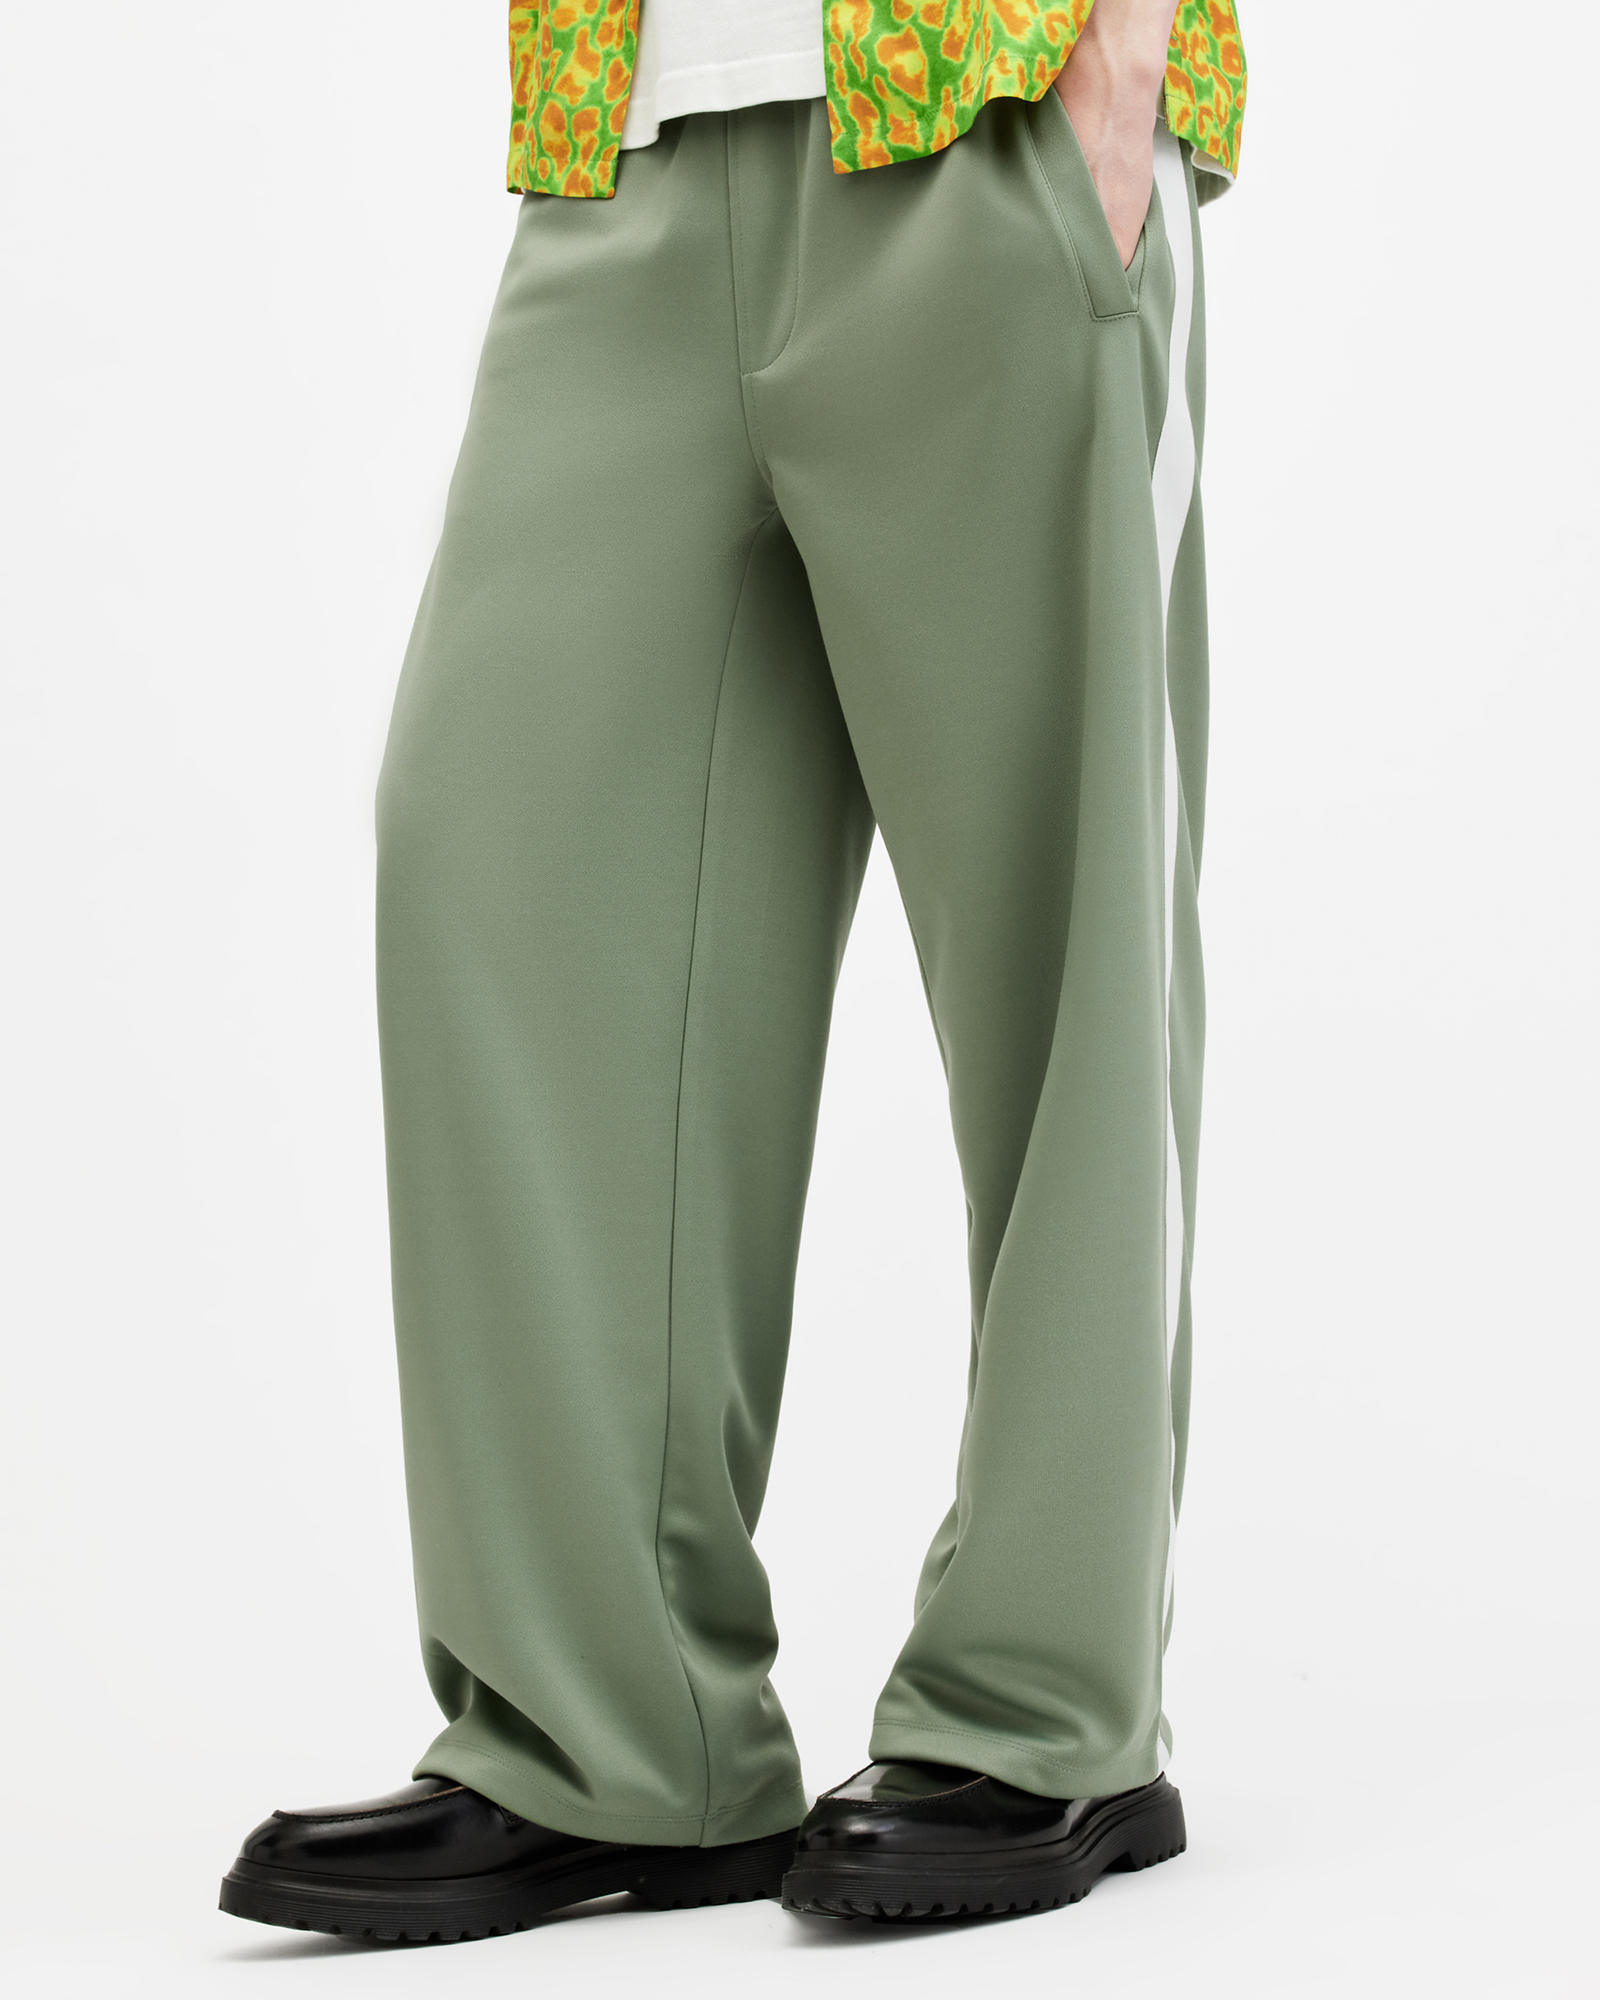 AllSaints Beck Recycled Straight Fit Sweatpants,, Shamrock Green